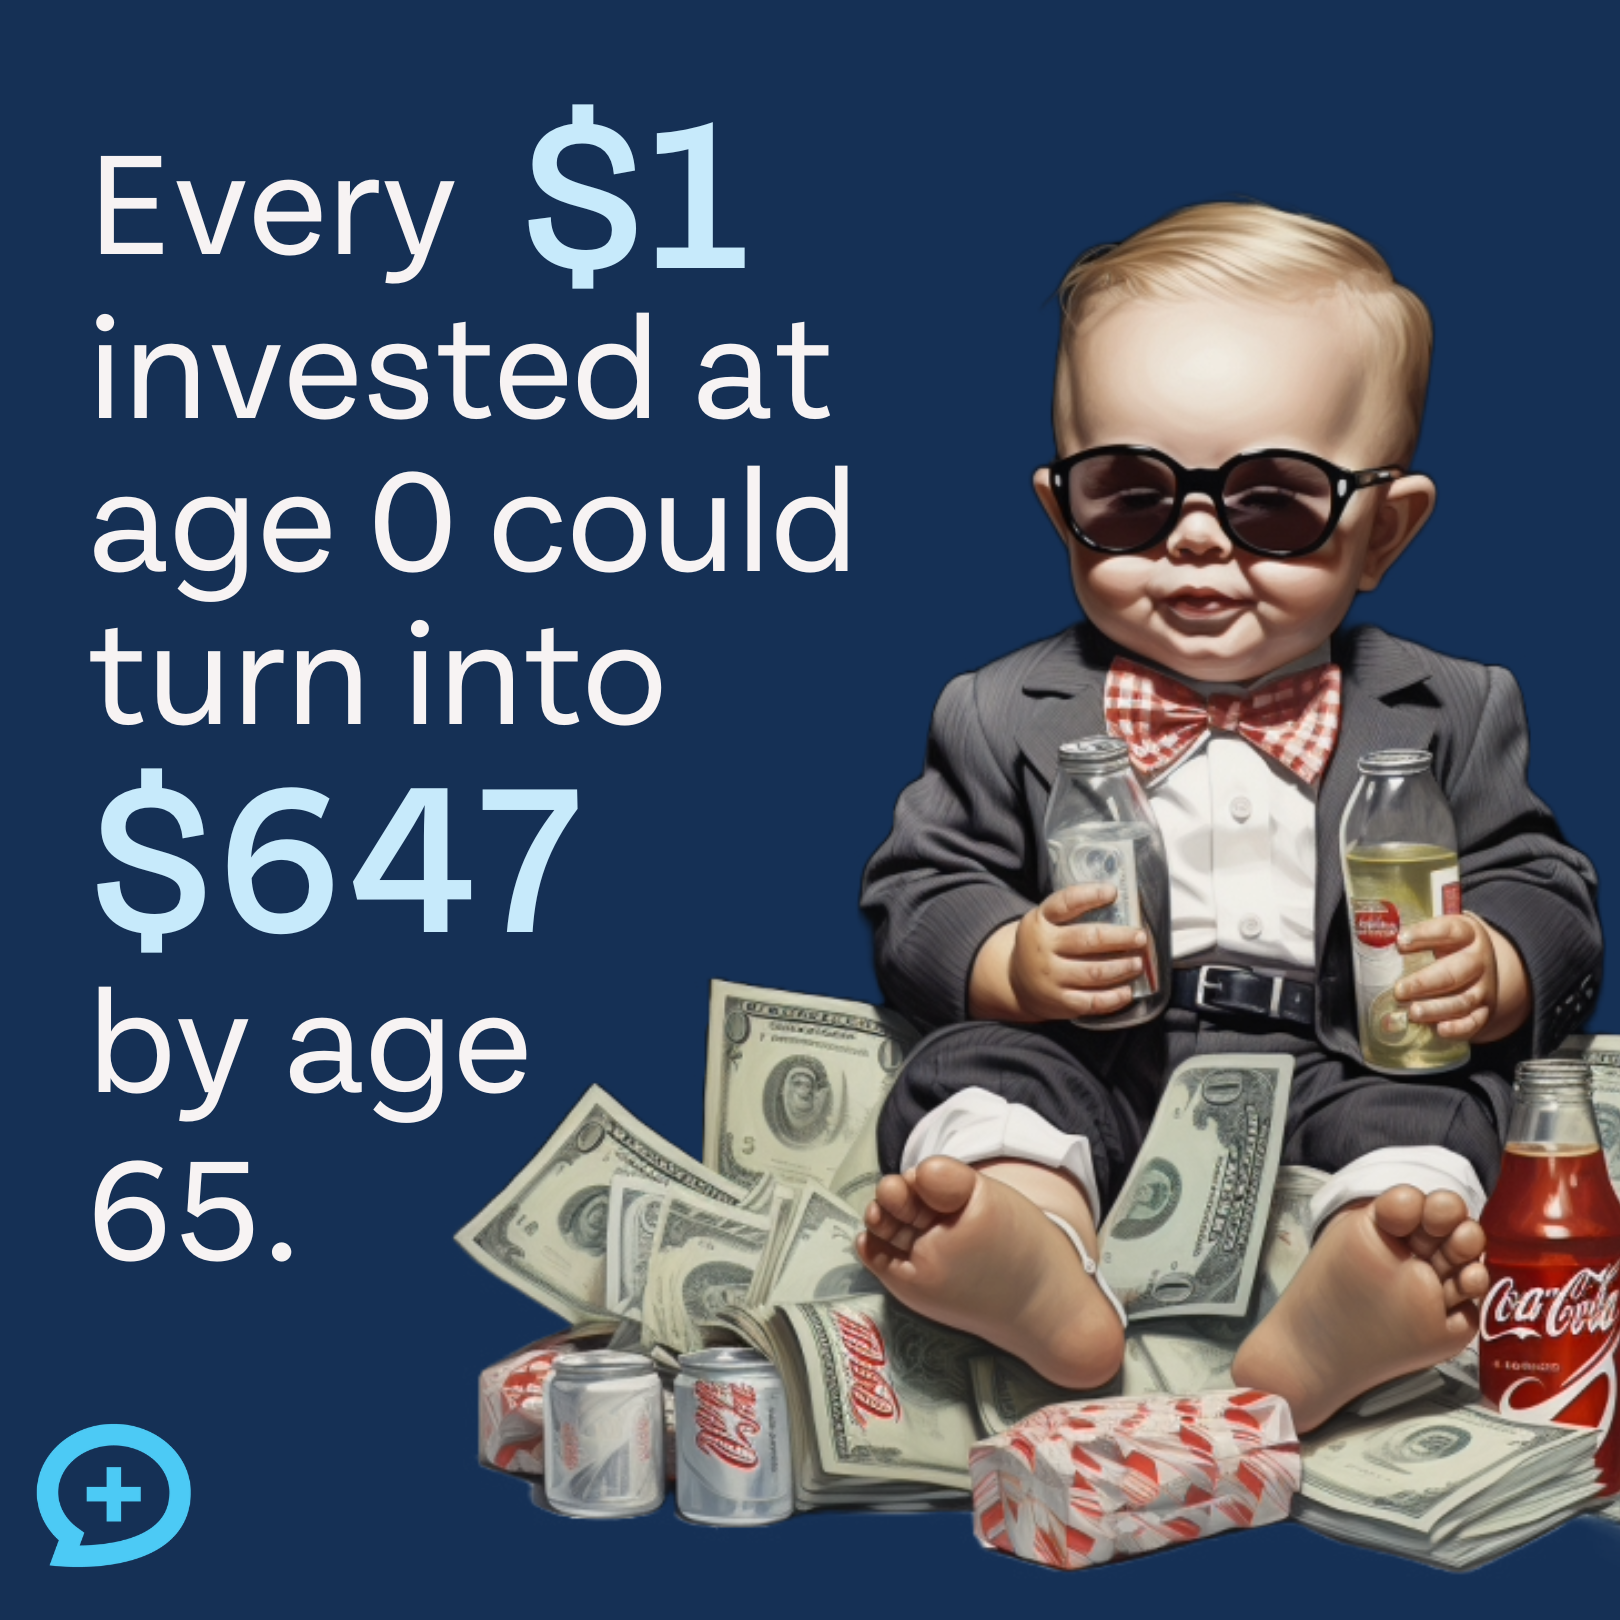 This is a humorous image of a baby drinking an apple juice dressed like Warren Buffett sitting on a pile of money. The image is accompanied by the text, "Every $1 invested at age 0 could turn into $647 by age 65."